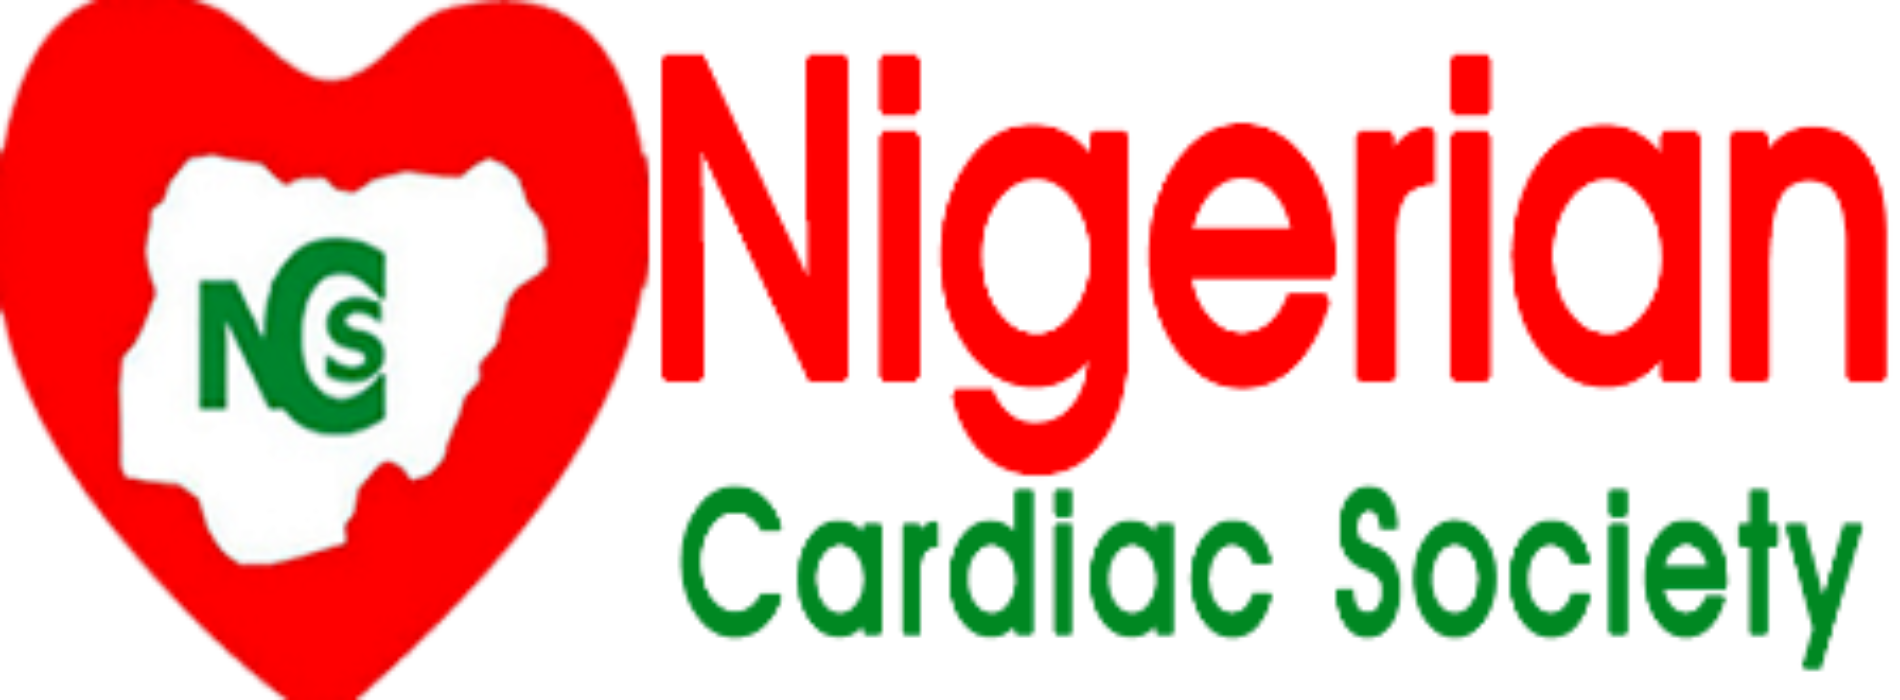 FG must address challenges of medical manpower – Cardiologists cry out